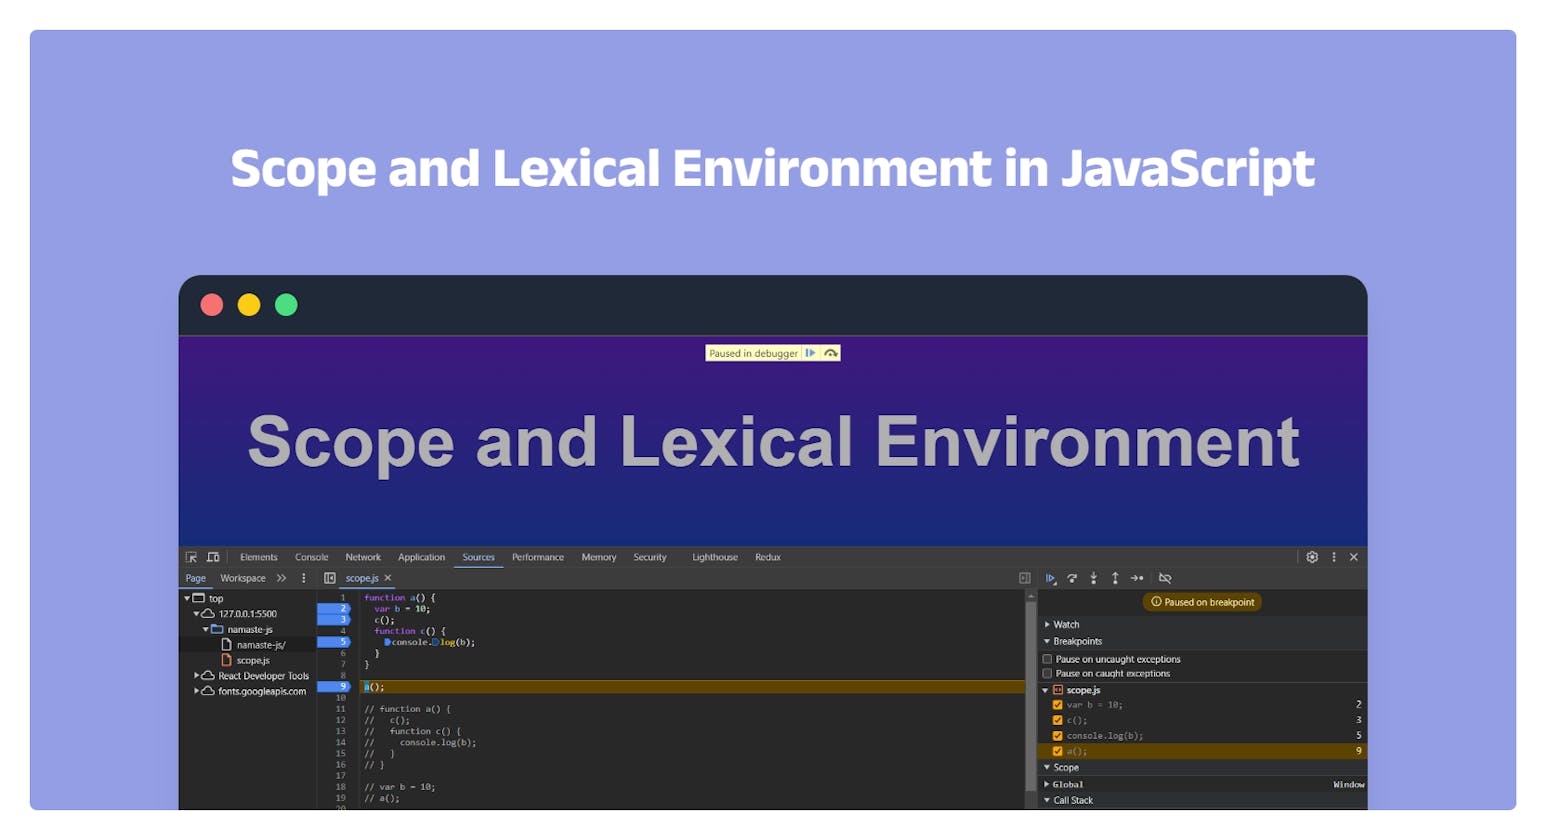 Scope and Lexical Environment in JavaScript